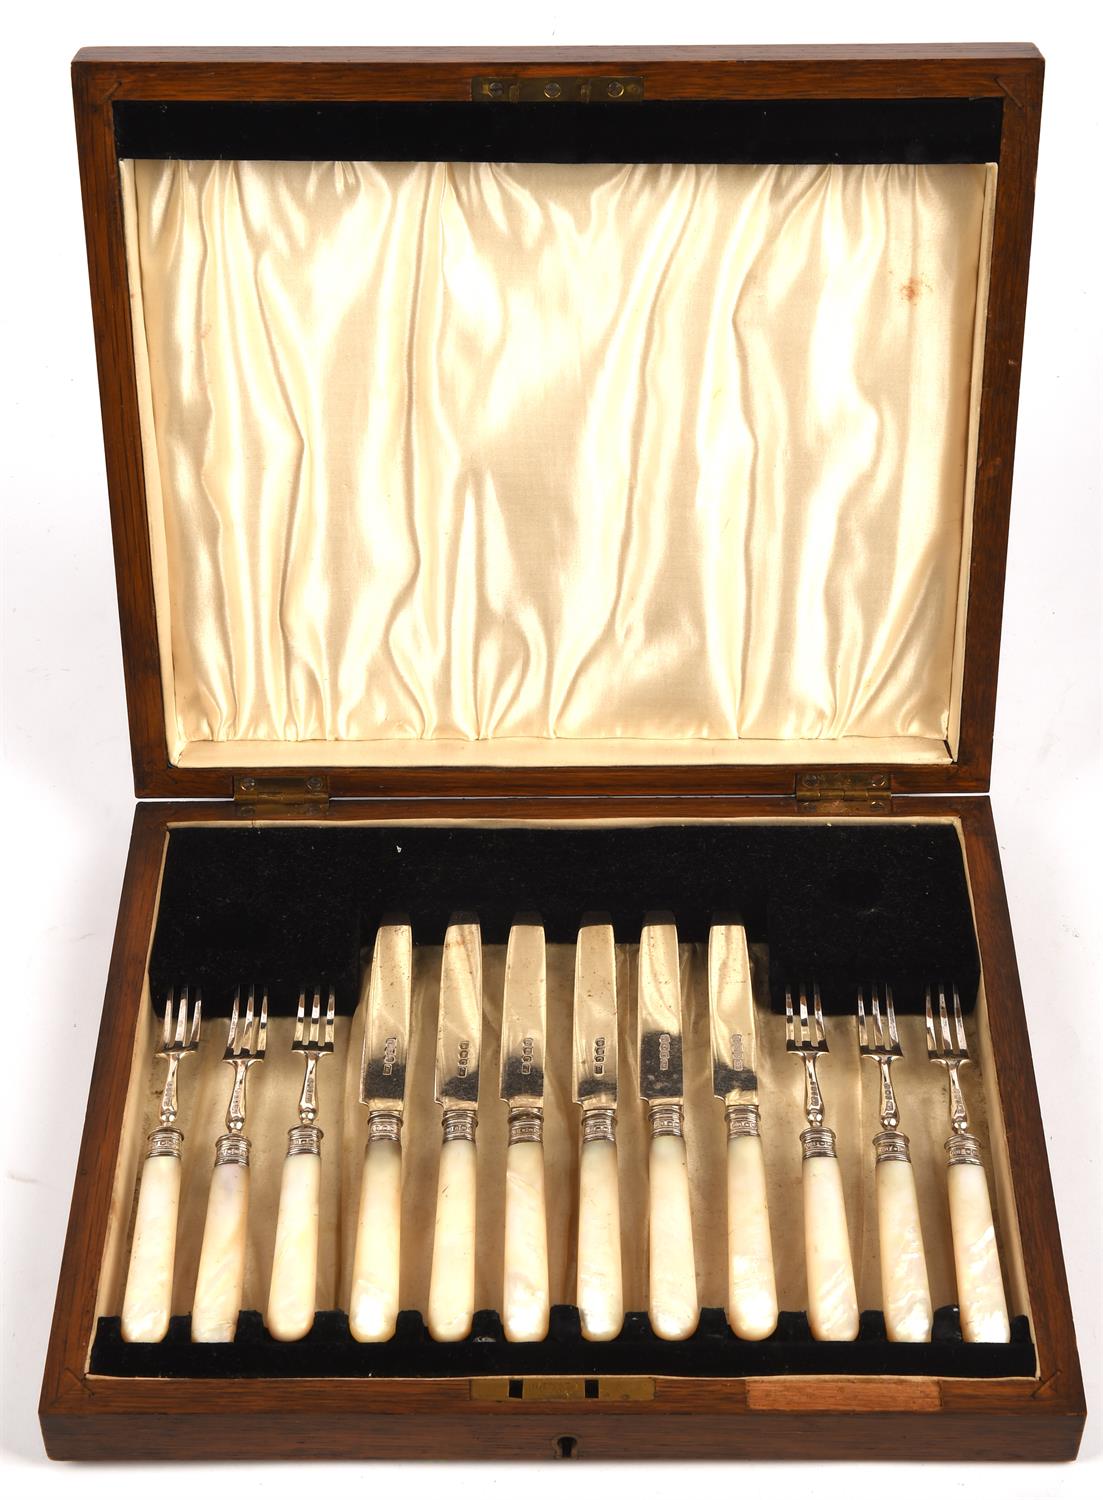 Cased silver fruit eating 12 piece set consisting of 6 forks, 6 knives with mother of pearls - Image 2 of 2